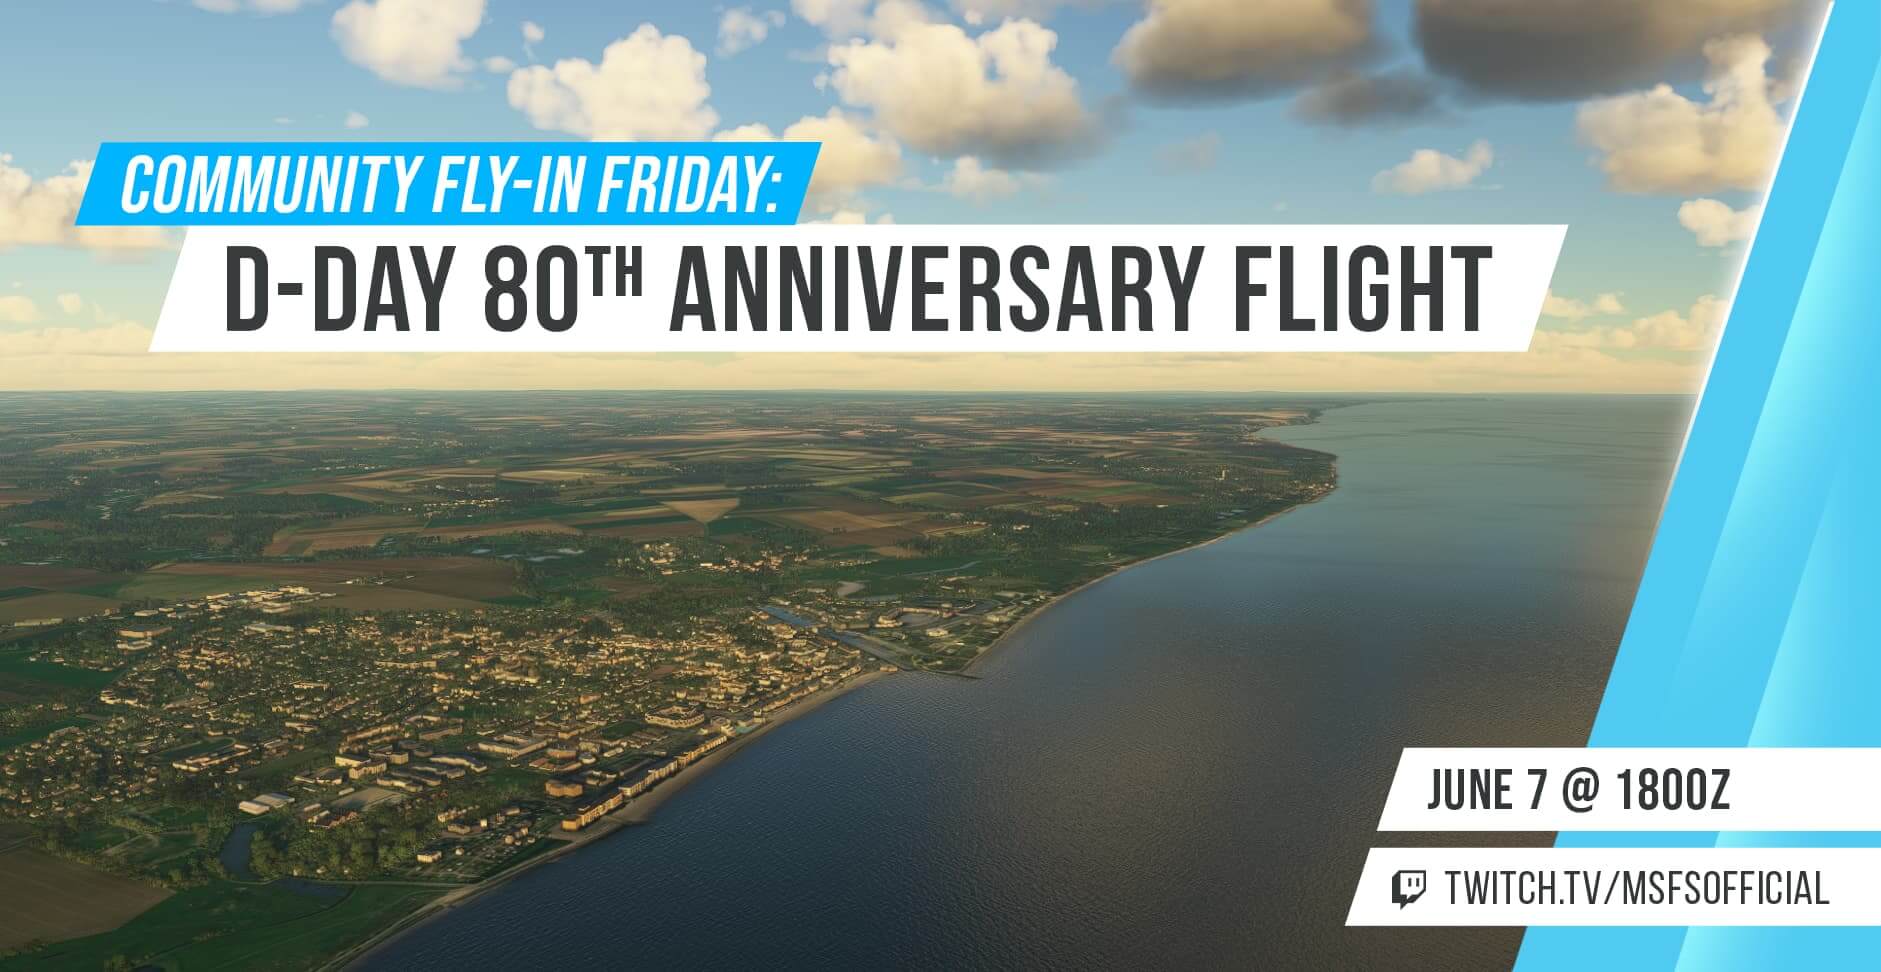 Community Fly-In Friday: D-Day 80th Anniversary Flight. June 7th at 1800 UTC. twitch.tv/msfsofficial